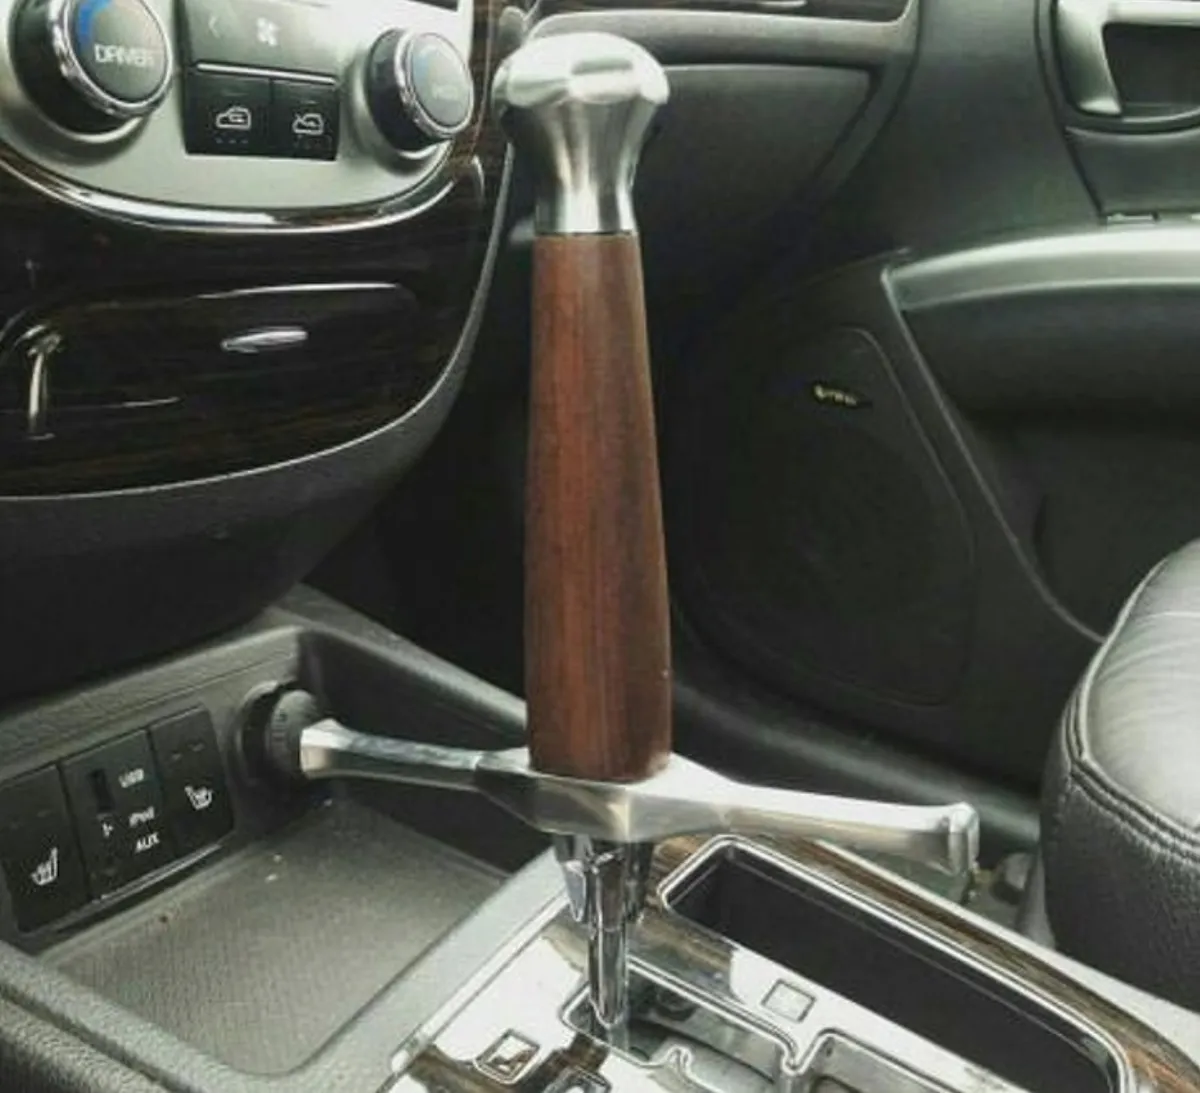 person uses sword hilt for gear shift